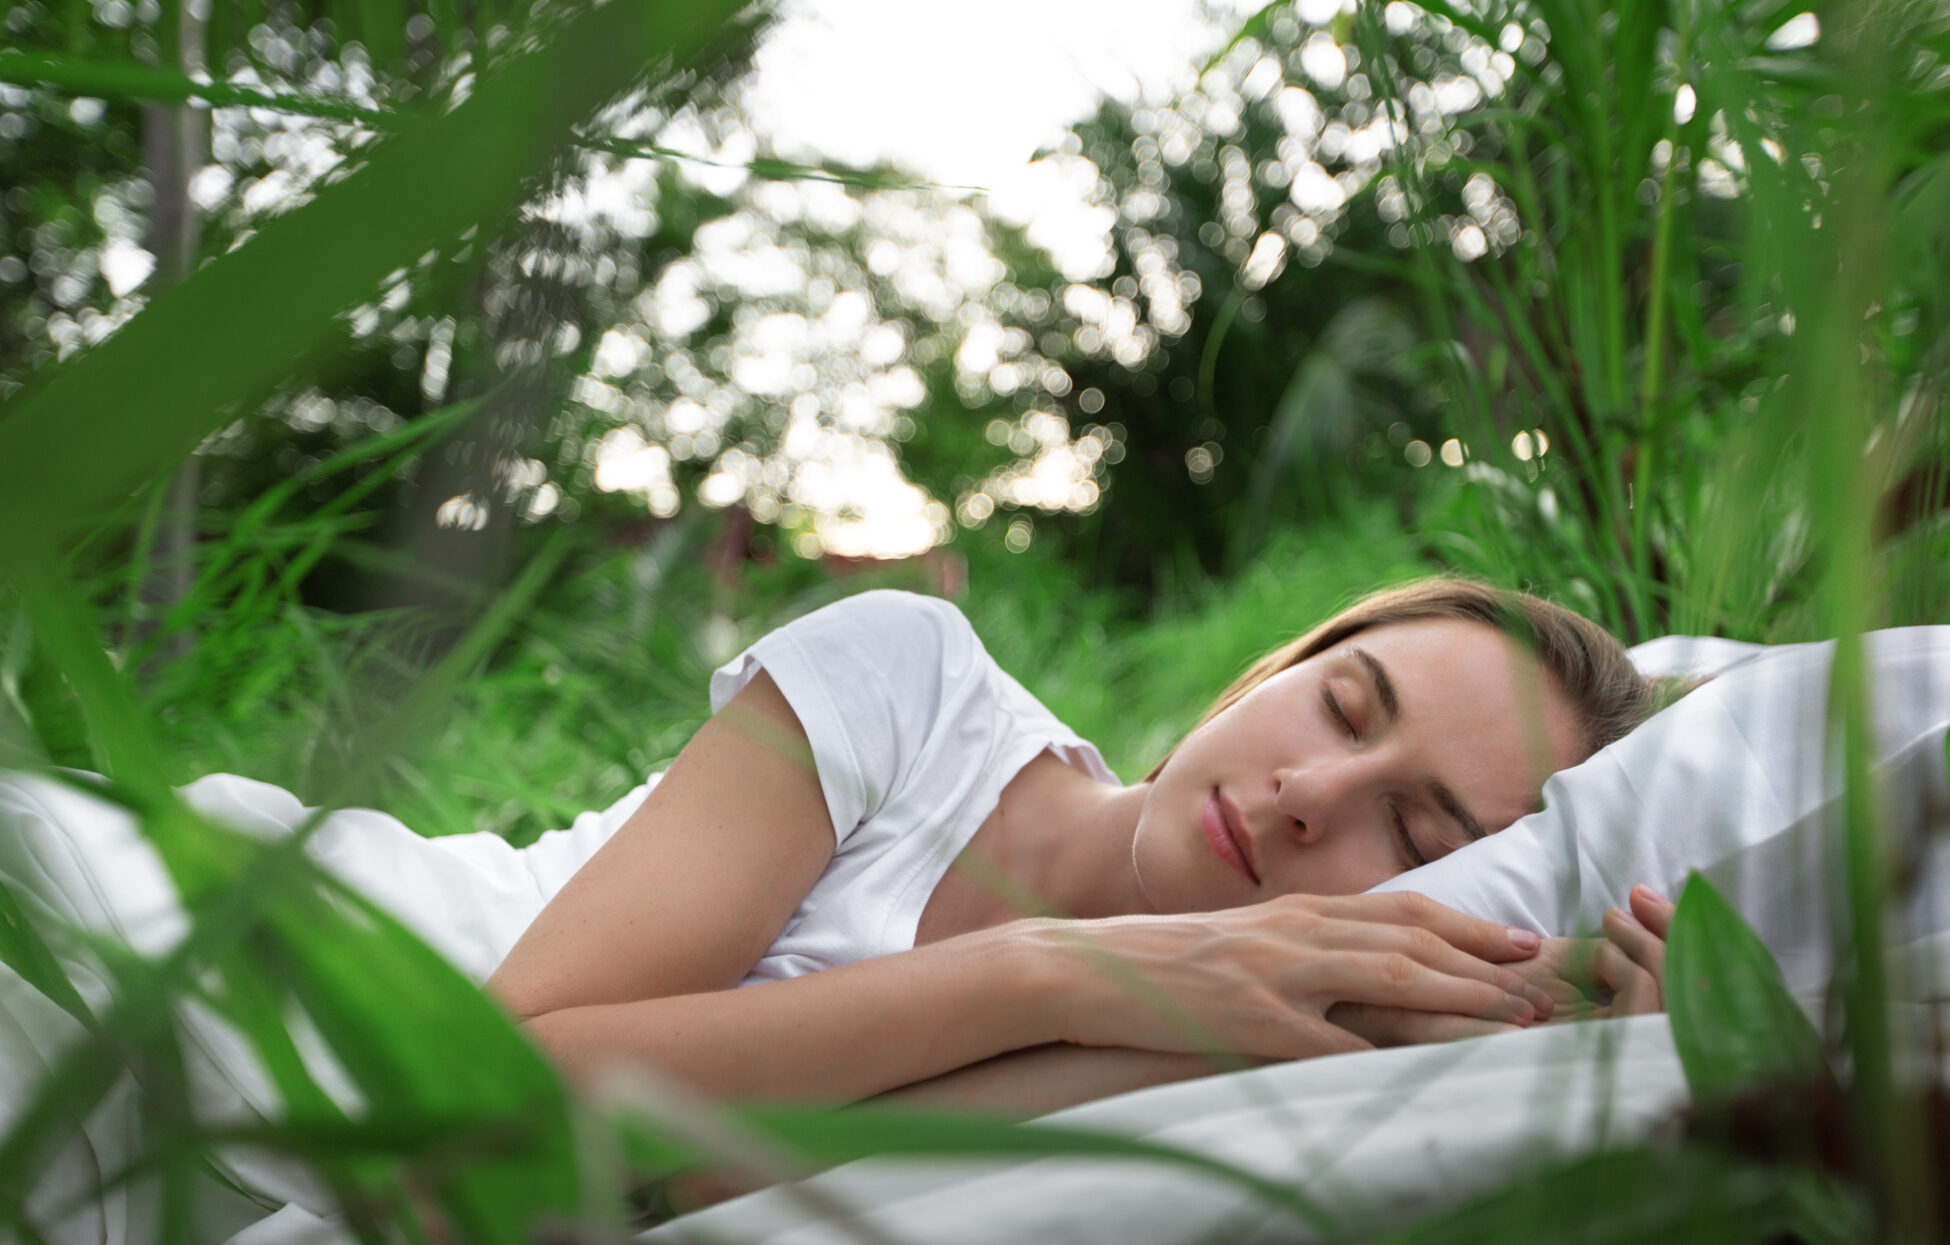 Woman sleeping on grass while listening to nature